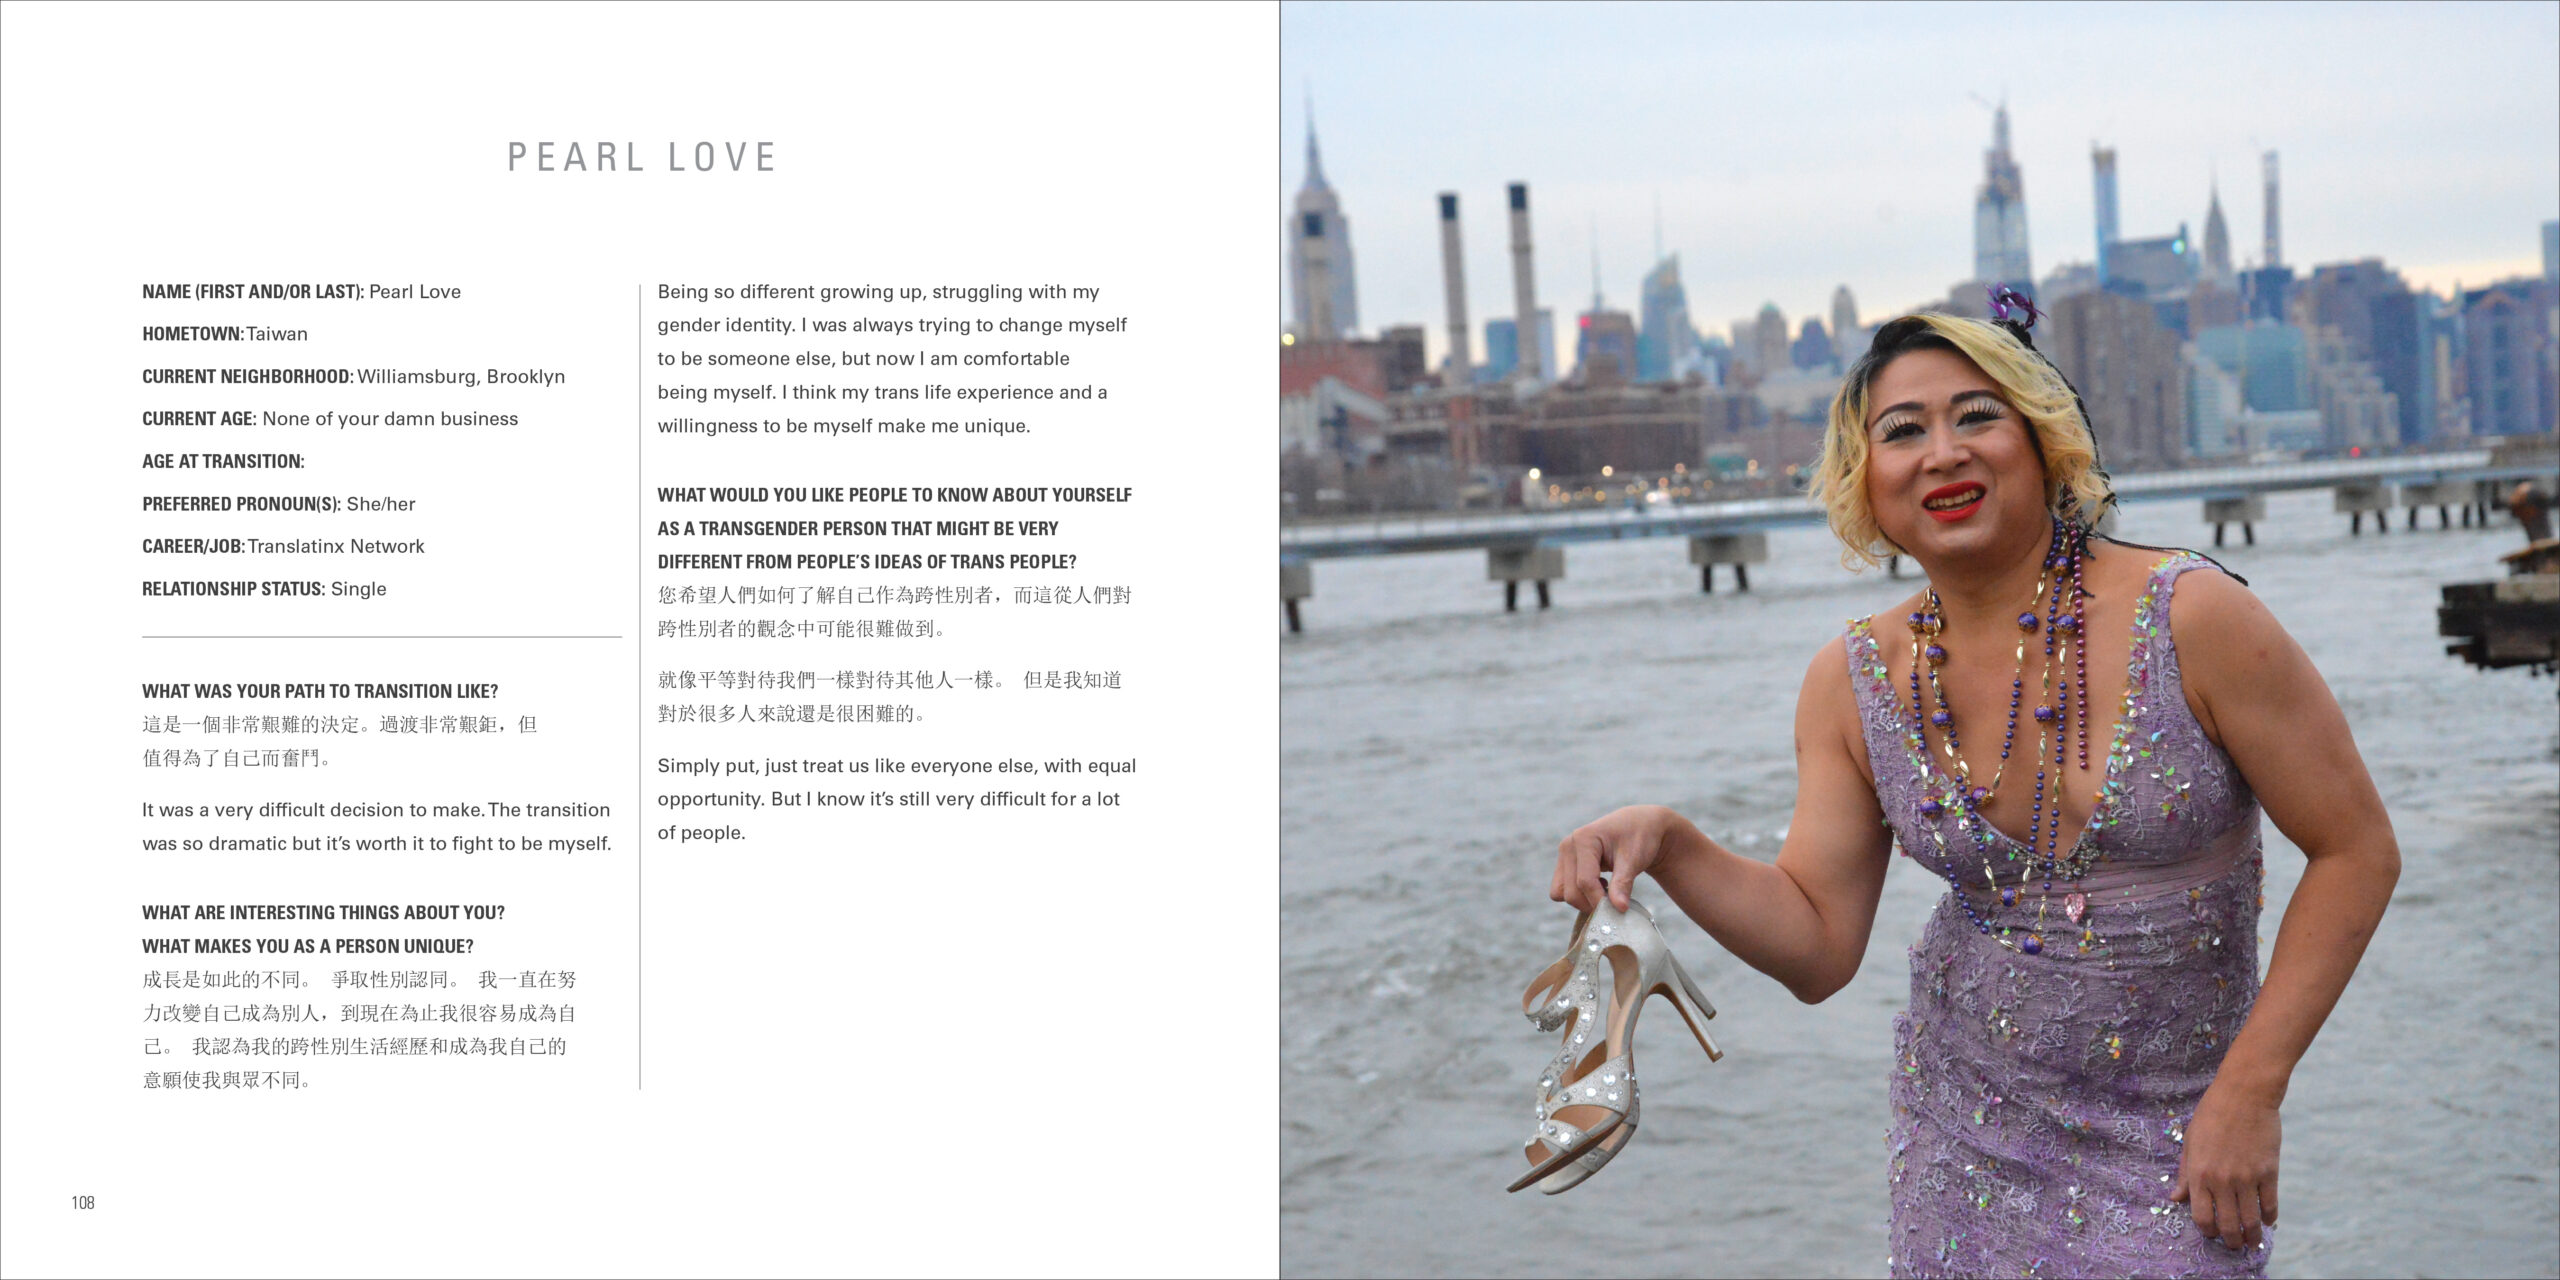 A photograph and interview with Pearl Love featured in Trans New York by Peter Bussian (Photo Credit: Apollo Publishers)